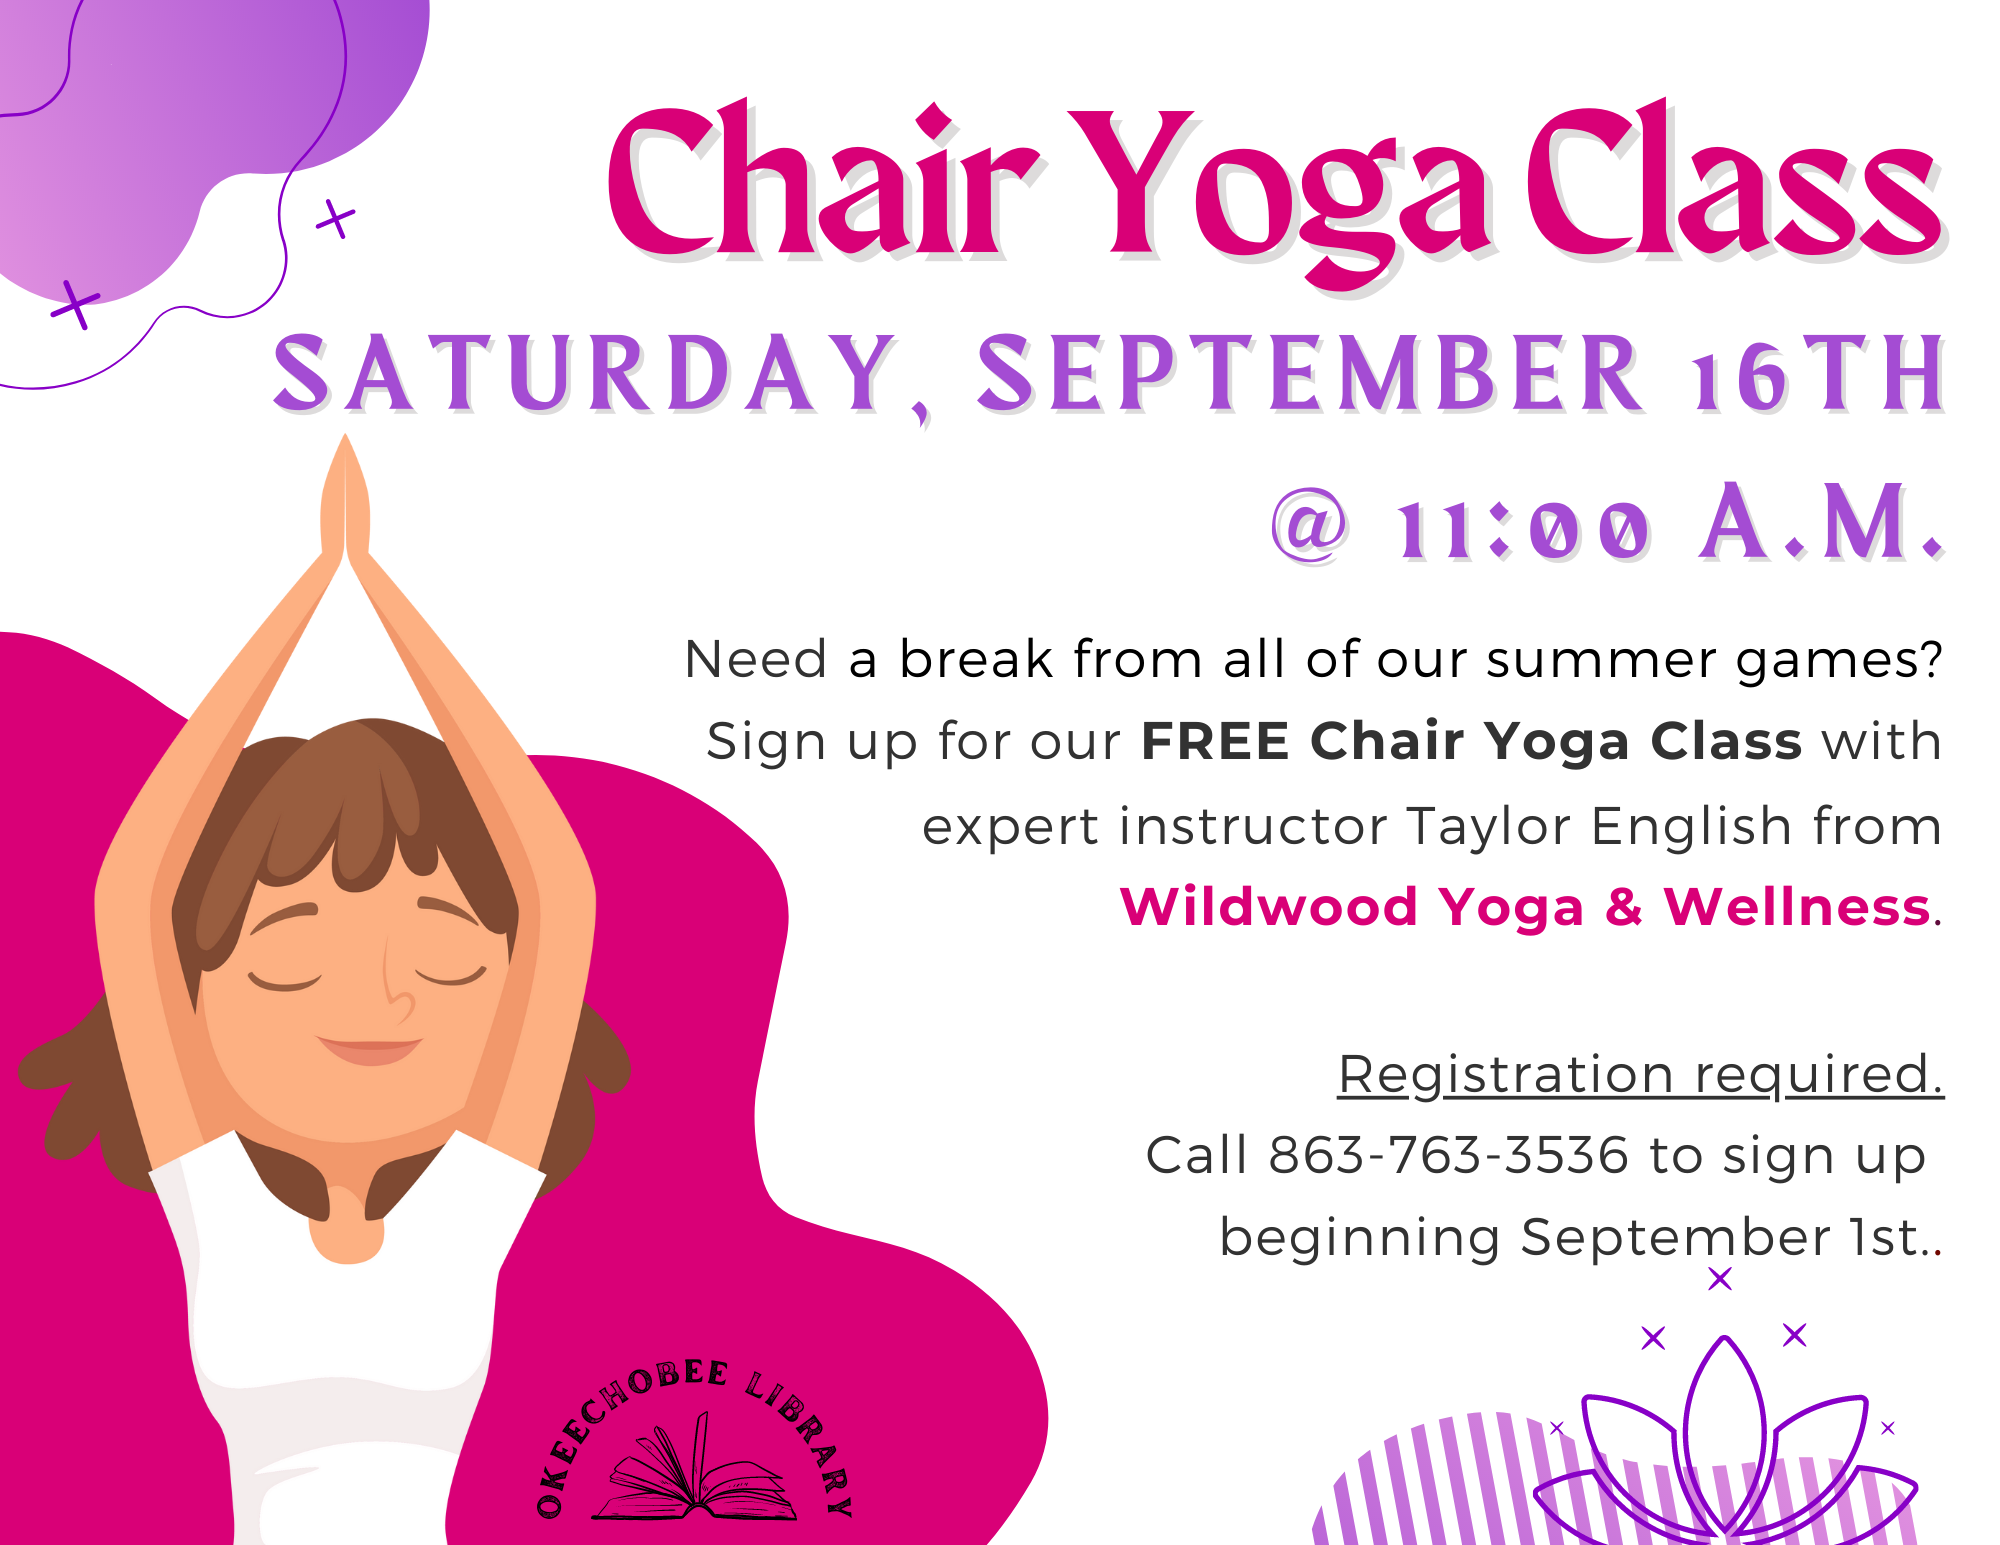 Looking for an easy exercise to help you workout?  Sign up for our FREE Chair Yoga Class on Saturday,September 16th @ 11:00 a.m. with expert instructor Taylor English from Wildwood Yoga & Wellness.